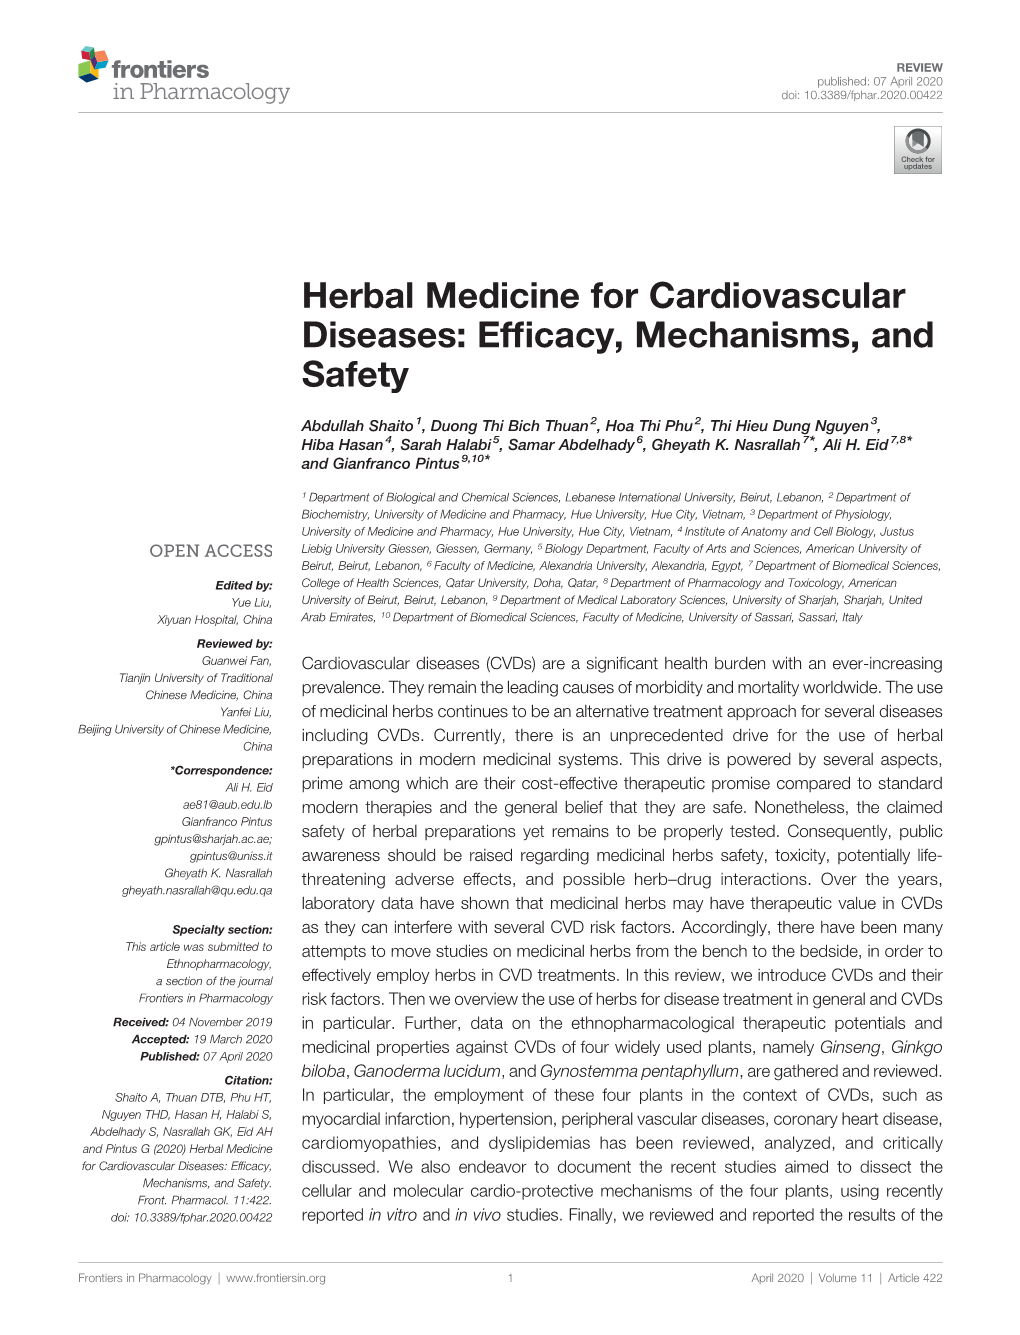 Herbal Medicine for Cardiovascular Diseases: Efﬁcacy, Mechanisms, and Safety